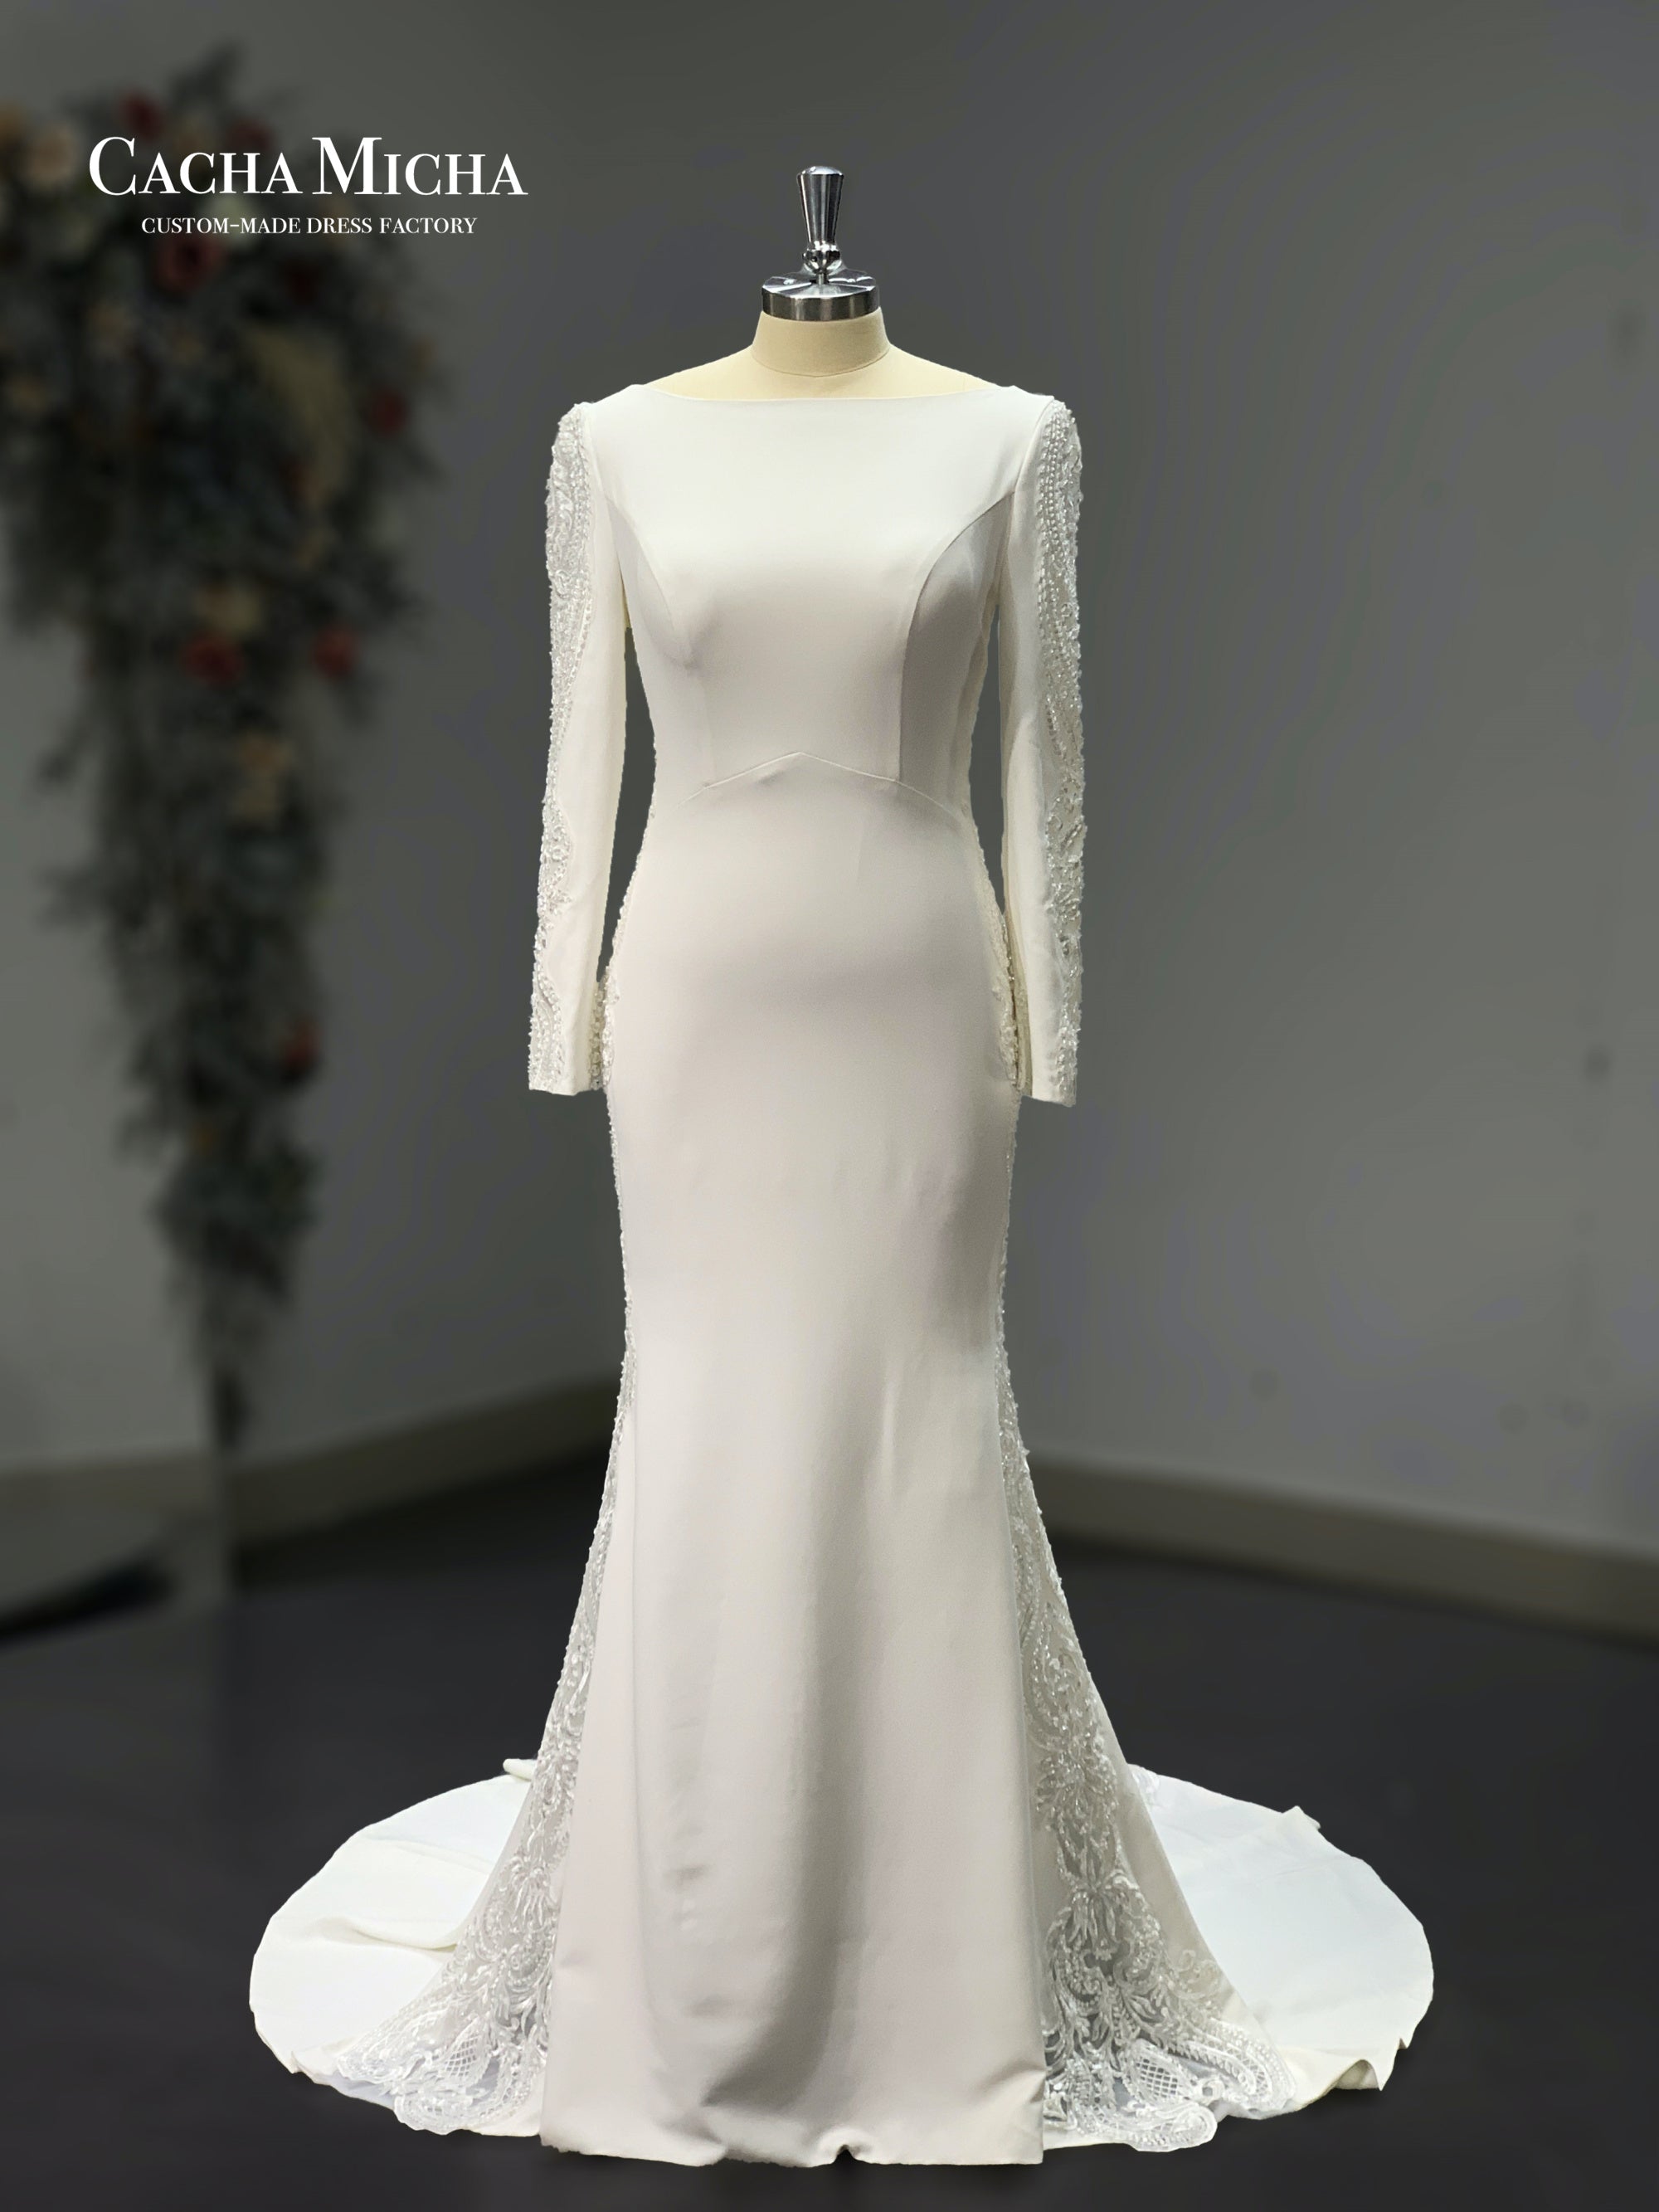 Elegant Long Sleeves Illusion Lace Crepe Bridal Gown R4480